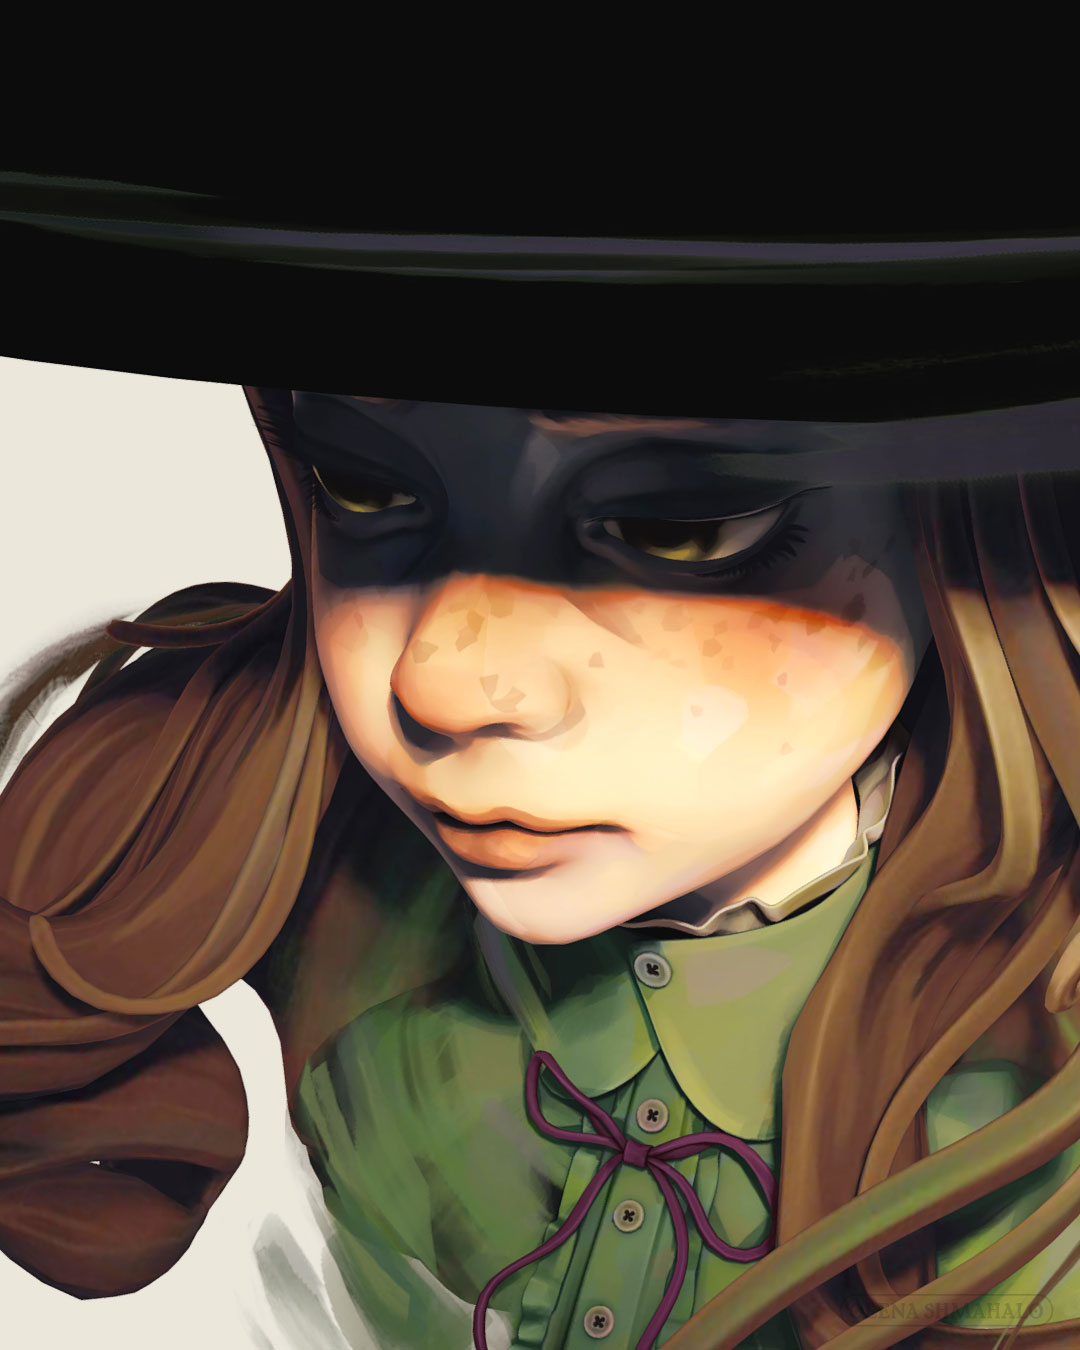 Close-up: Painted 3D sculpture of a girl with brown hair & green shirt wearing a witch hat.